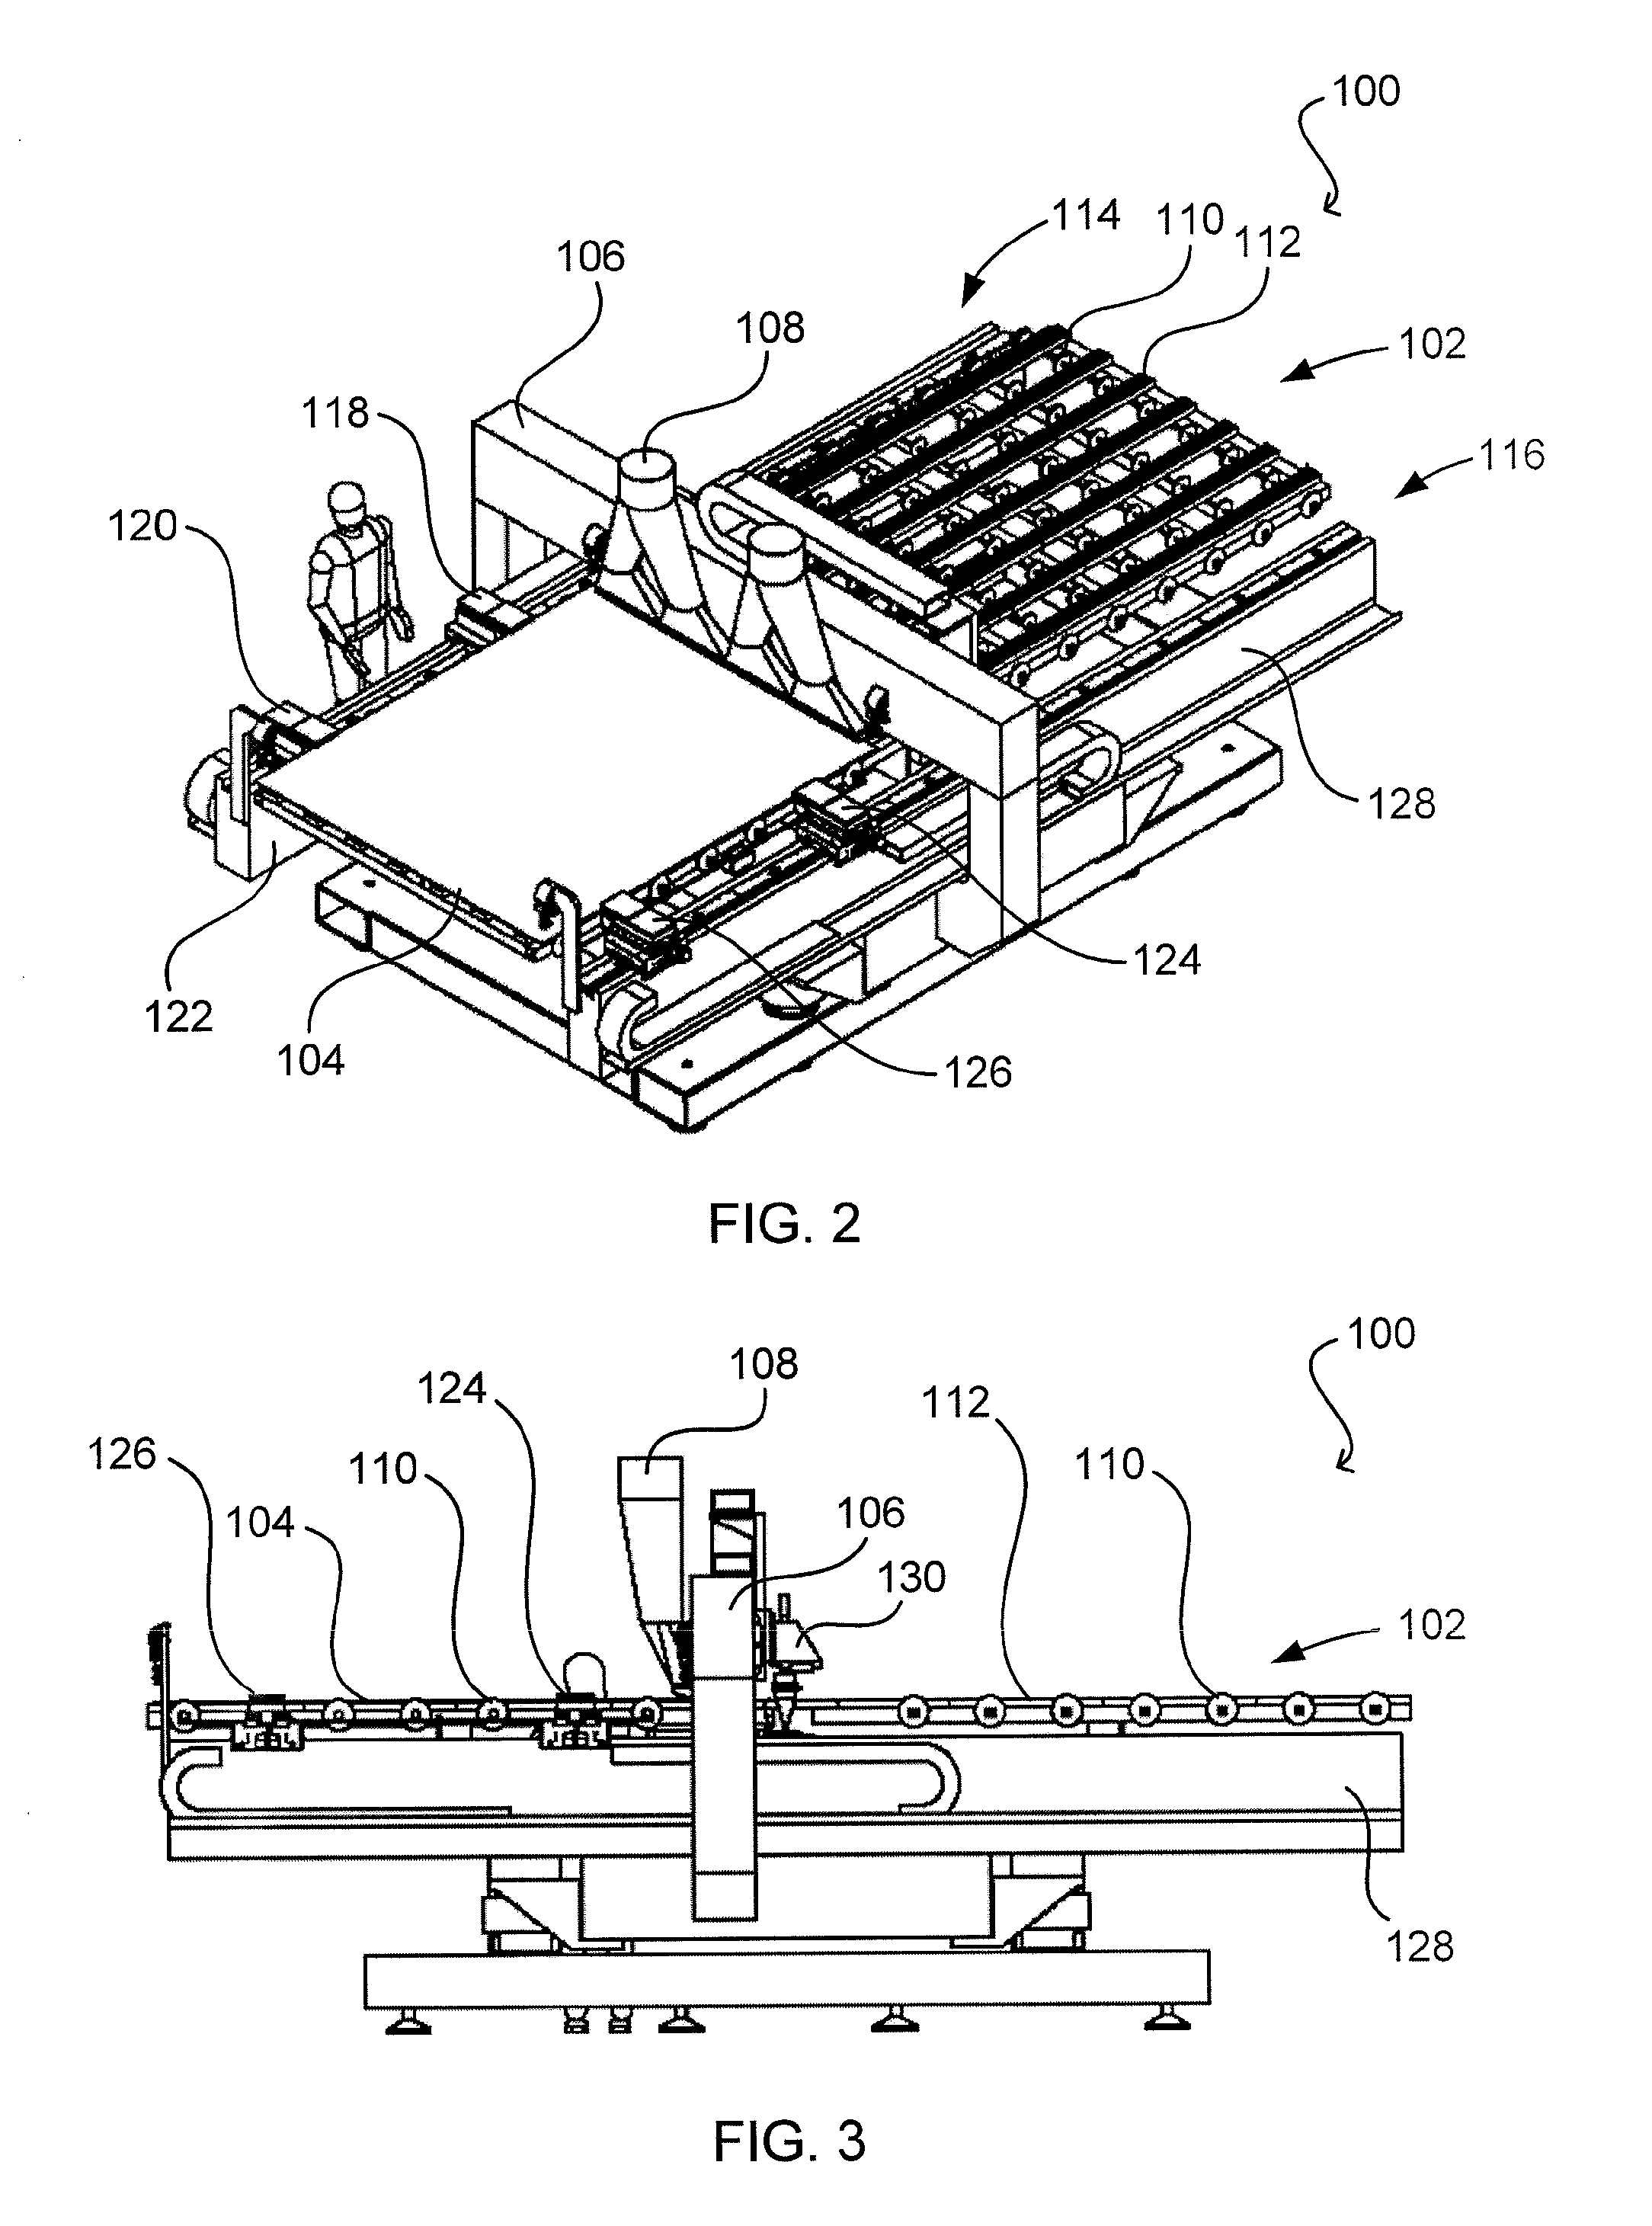 Laser modules and processes for thin film solar panel laser scribing